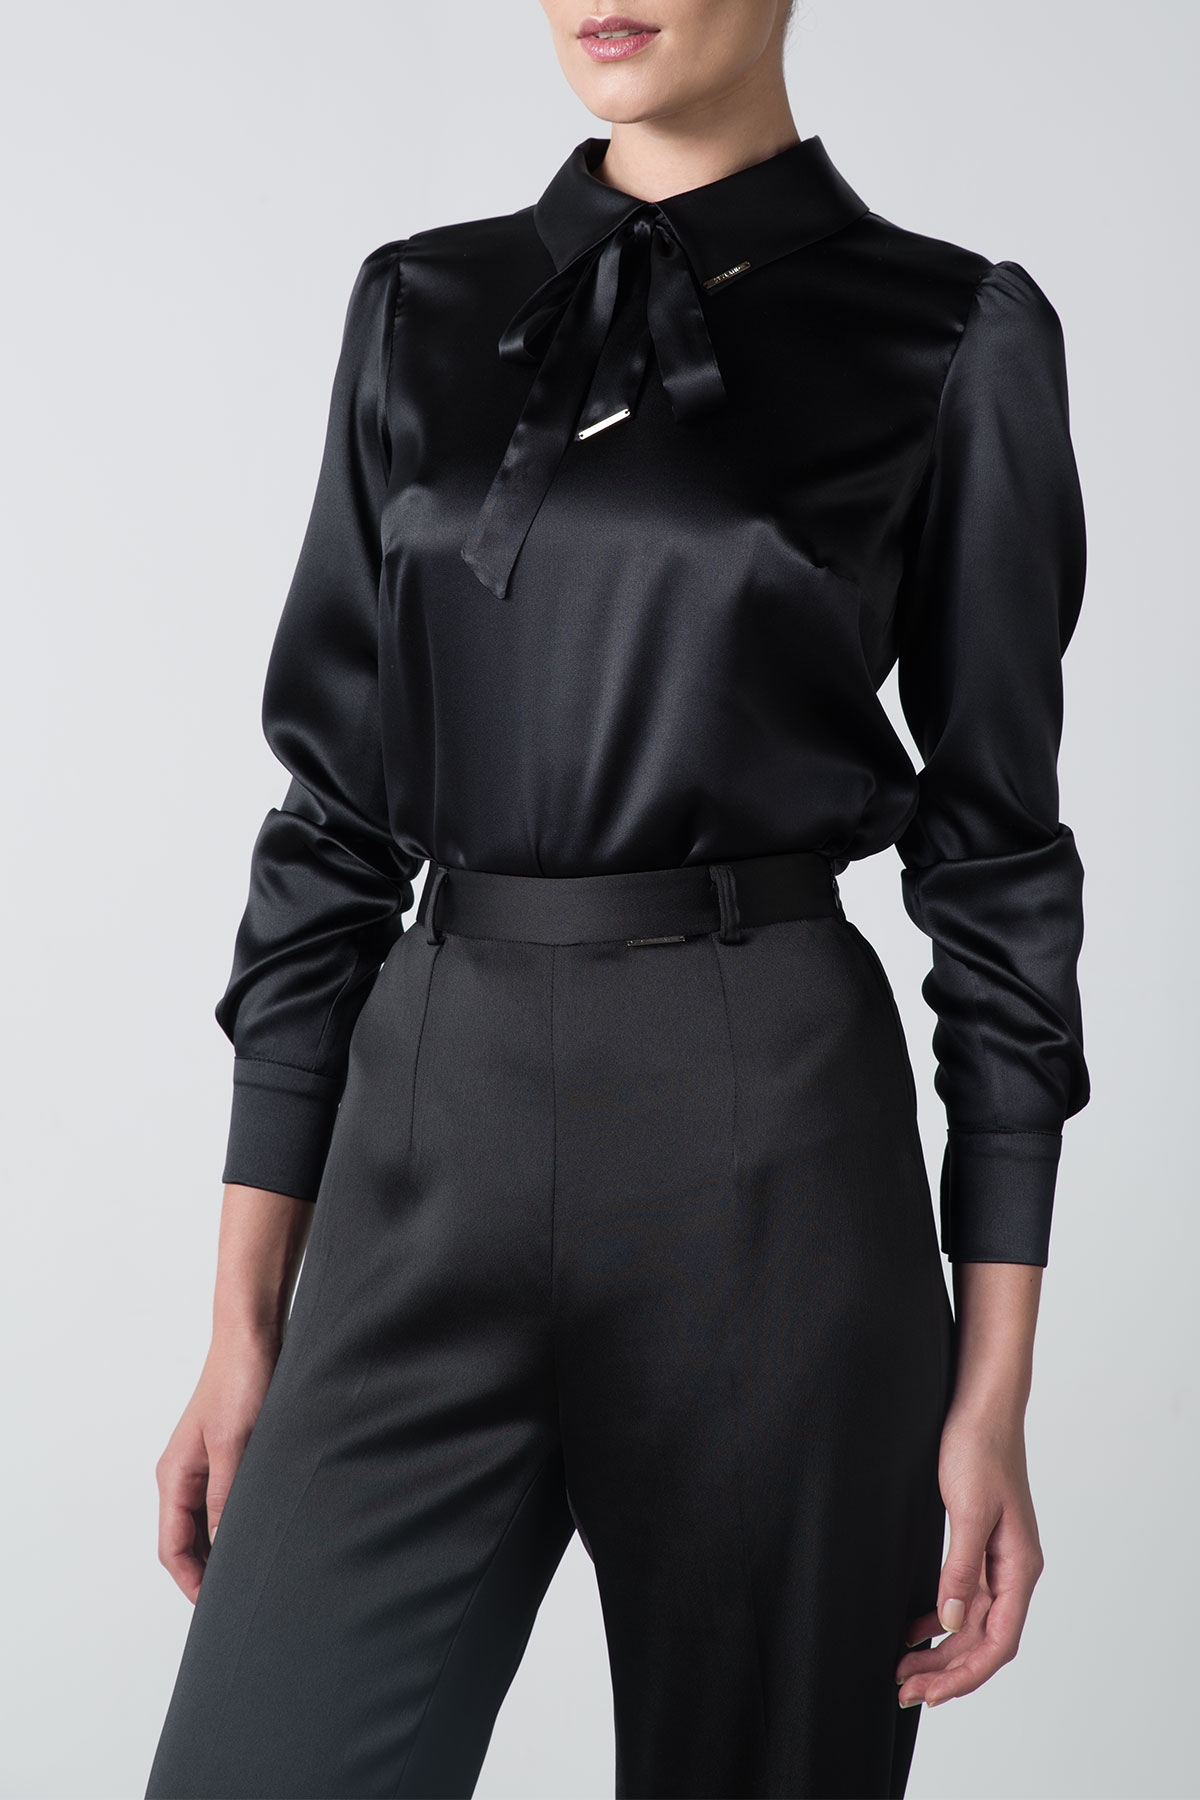 Black pussy-bow silk shirt with back buttons - STYLAND